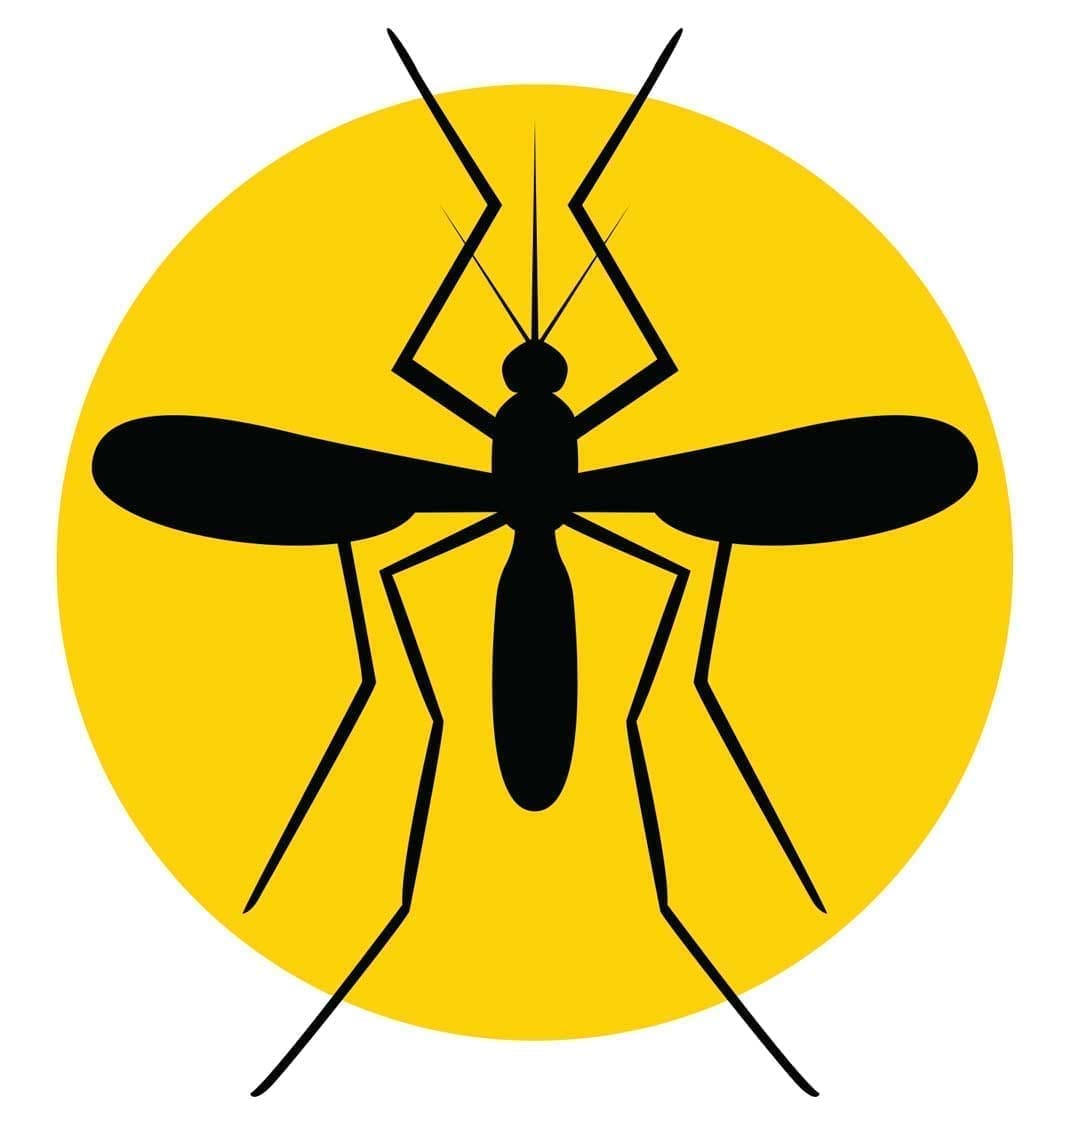 A mosquito is sitting on the ground in front of a yellow circle.